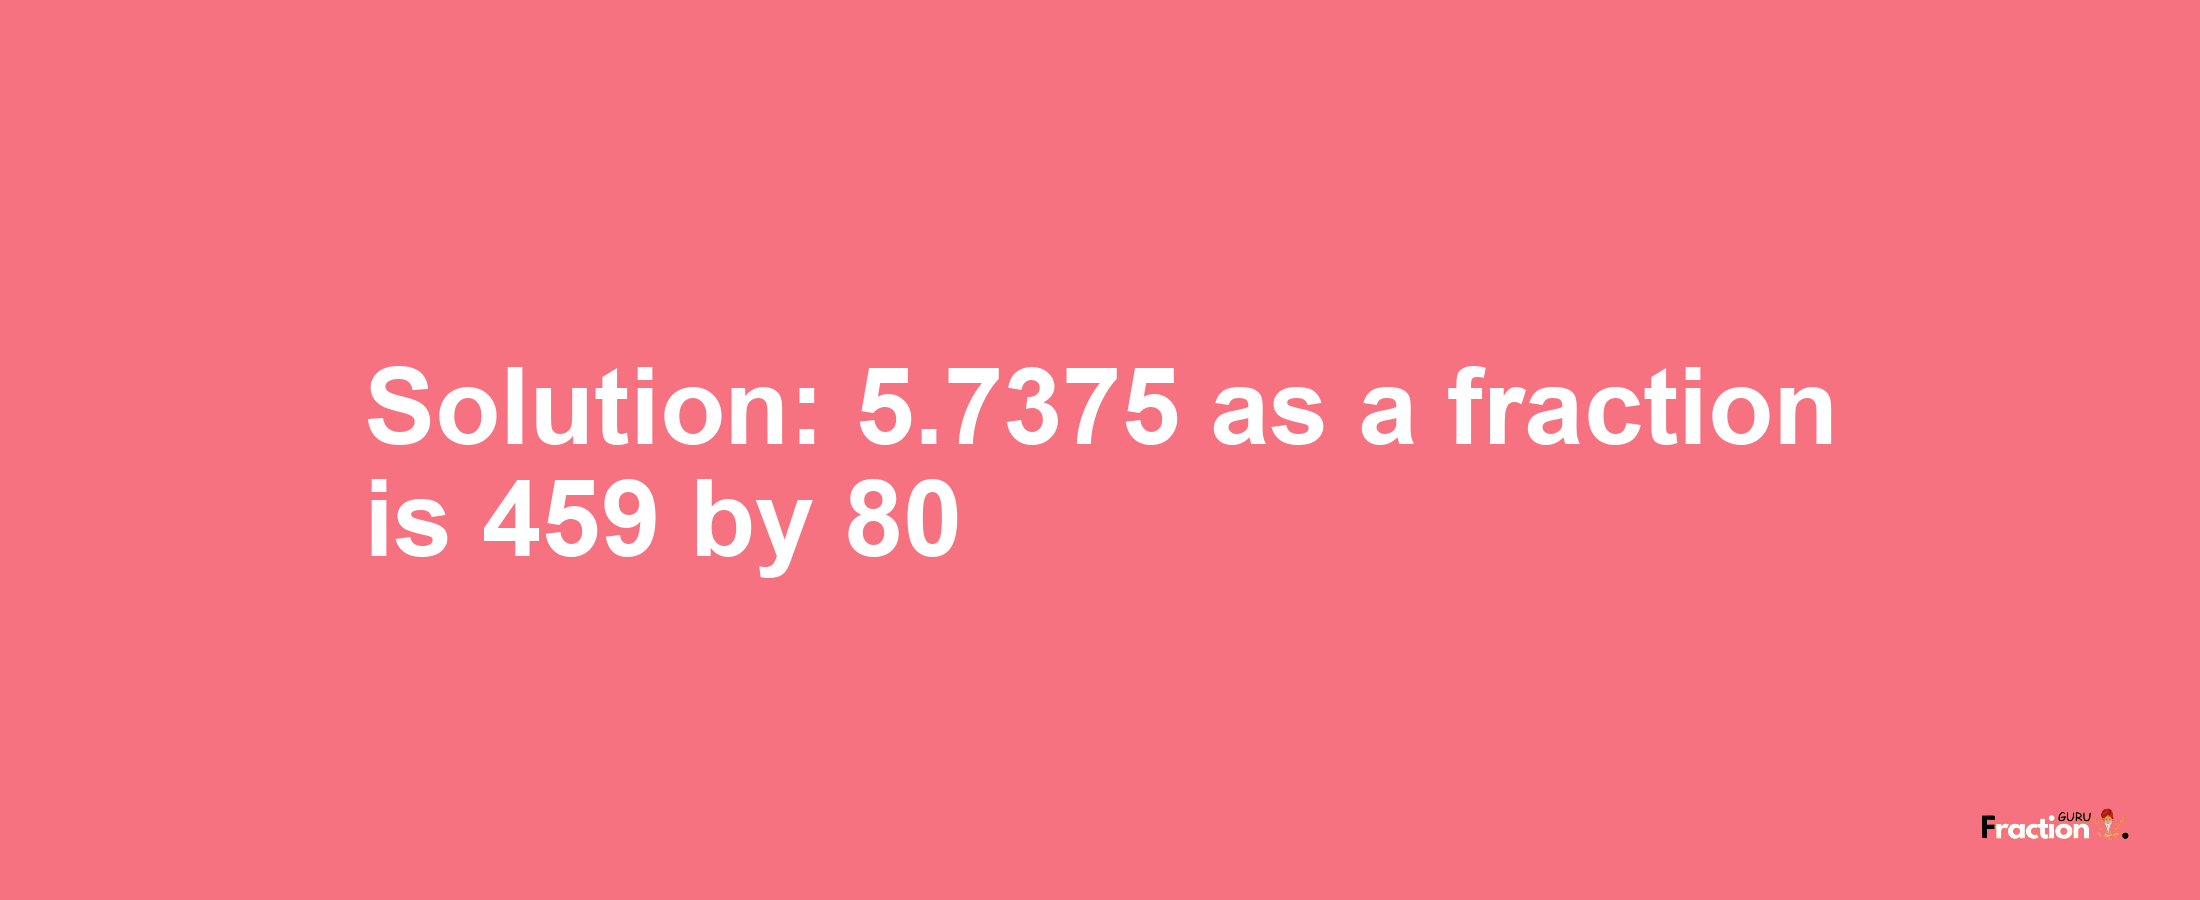 Solution:5.7375 as a fraction is 459/80